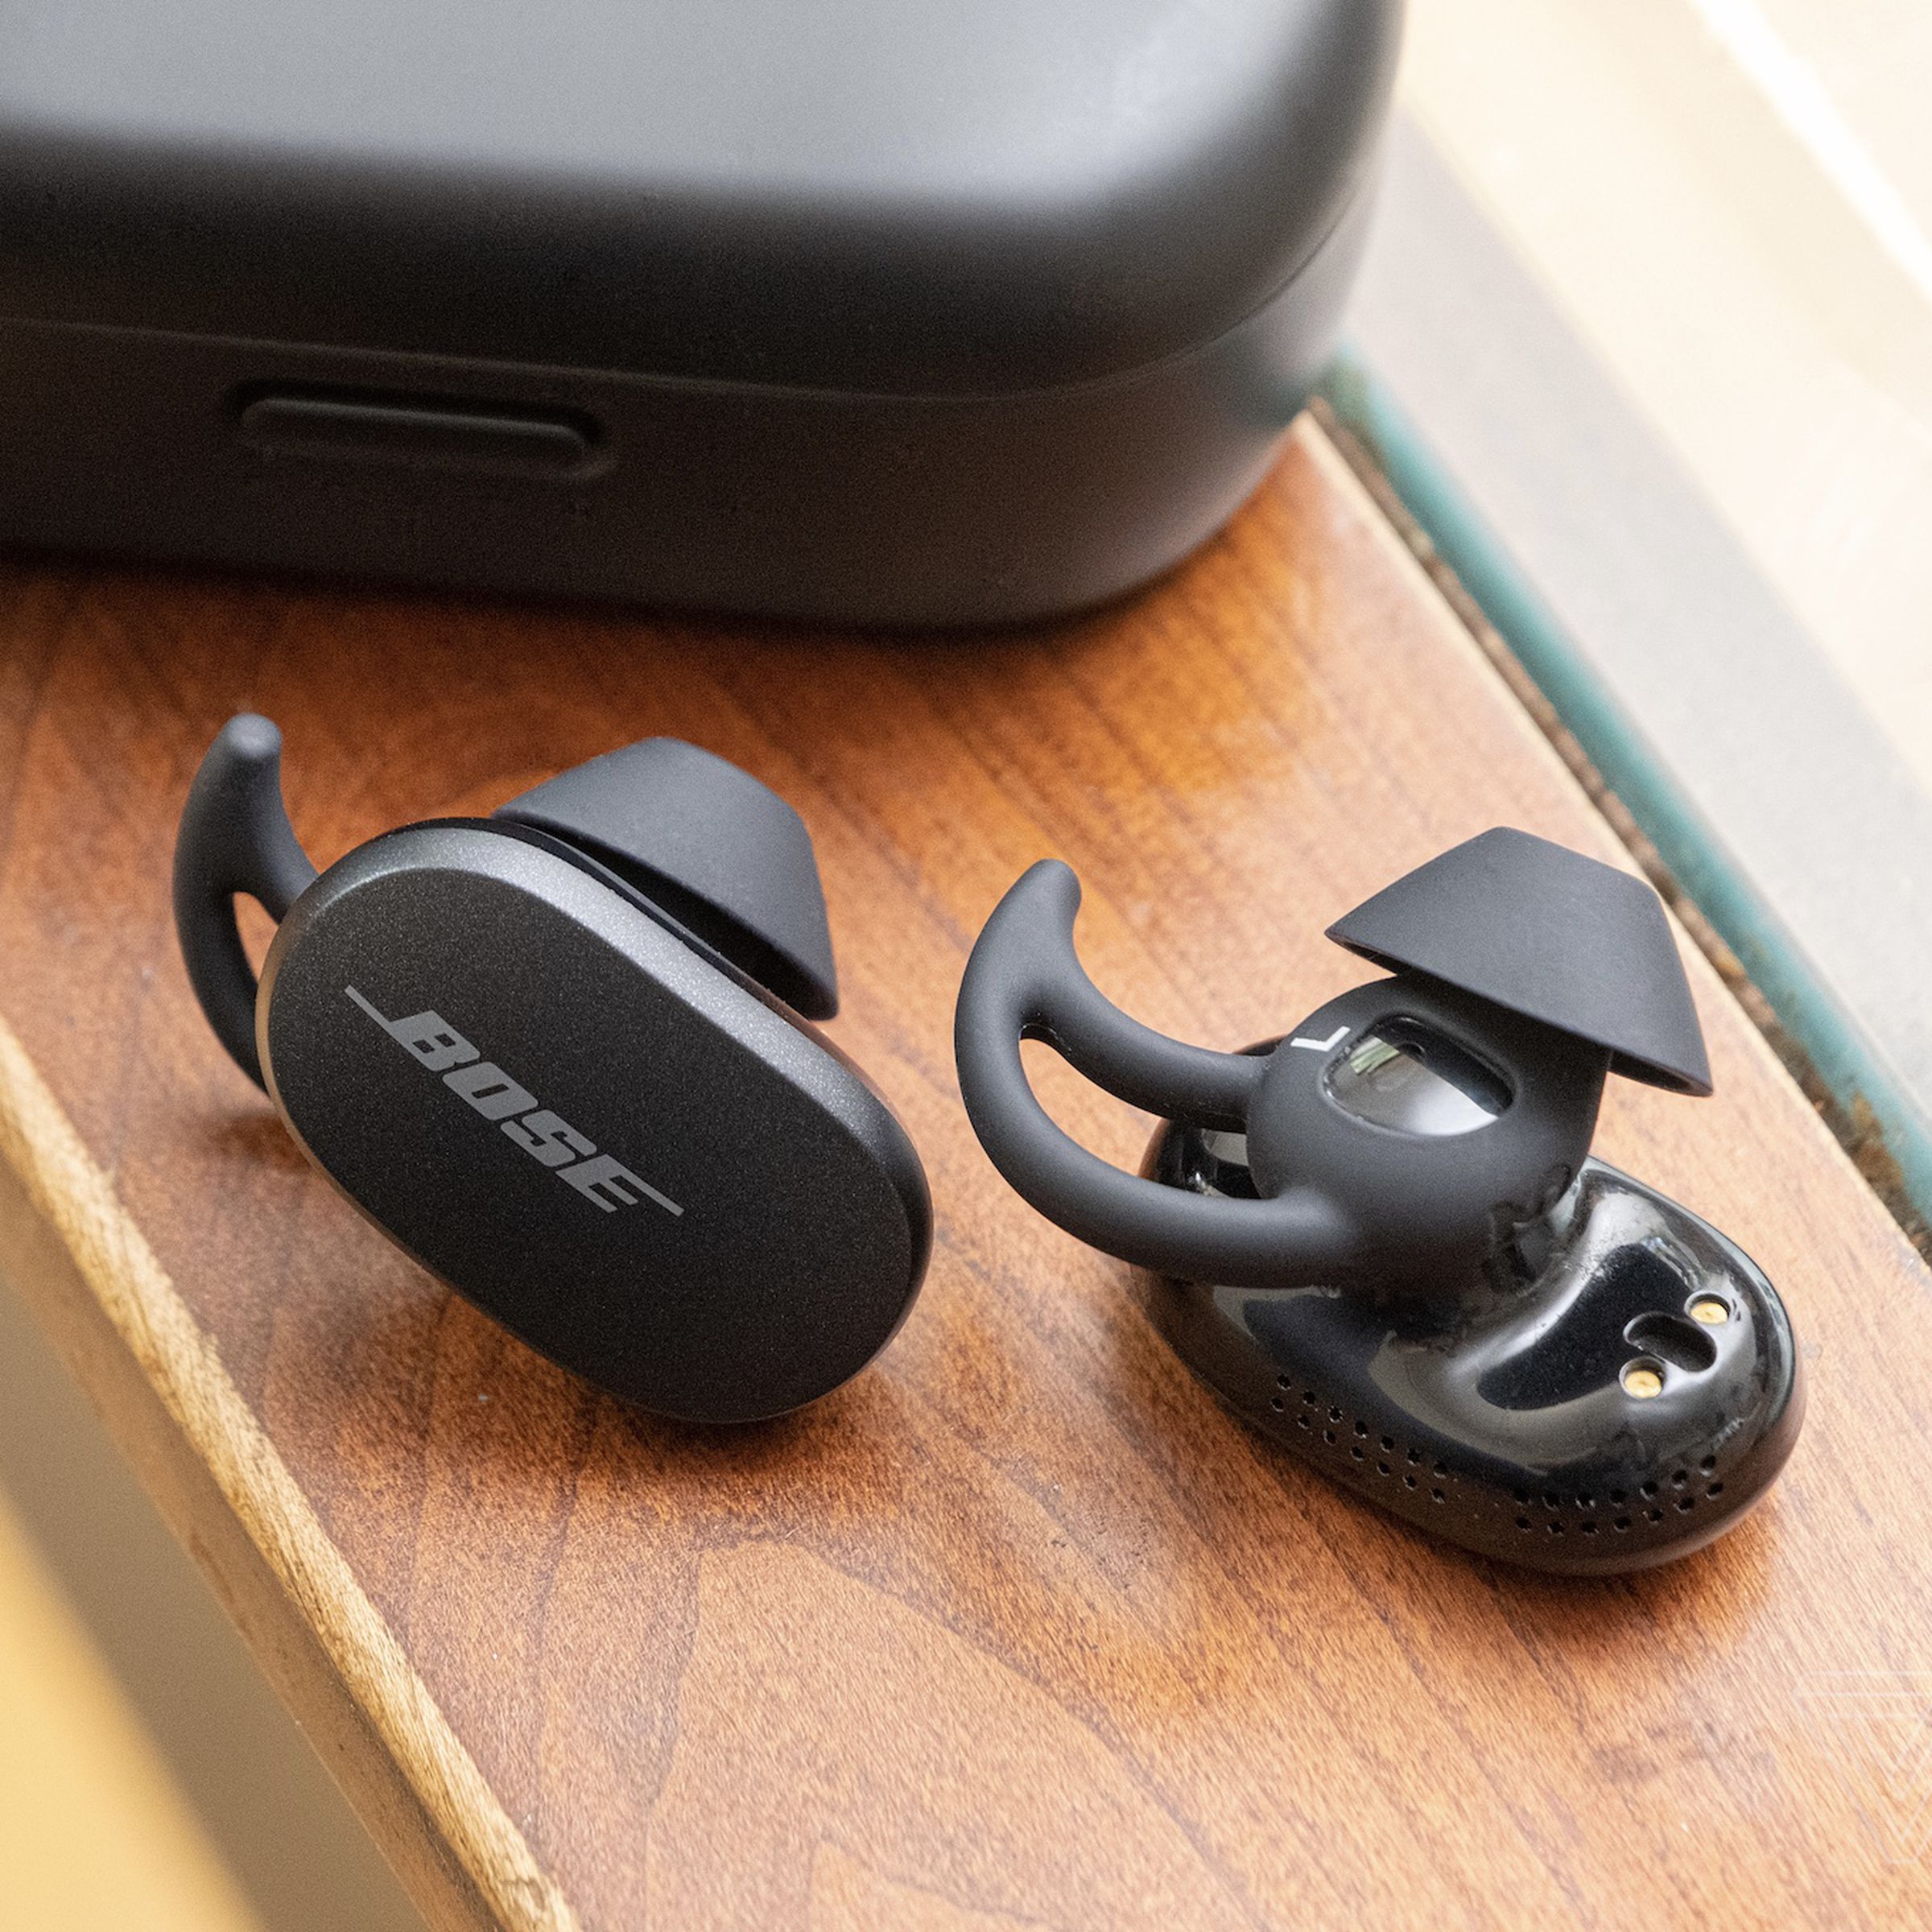 The Bose QuietComfort Earbuds on a table beside the carrying case.